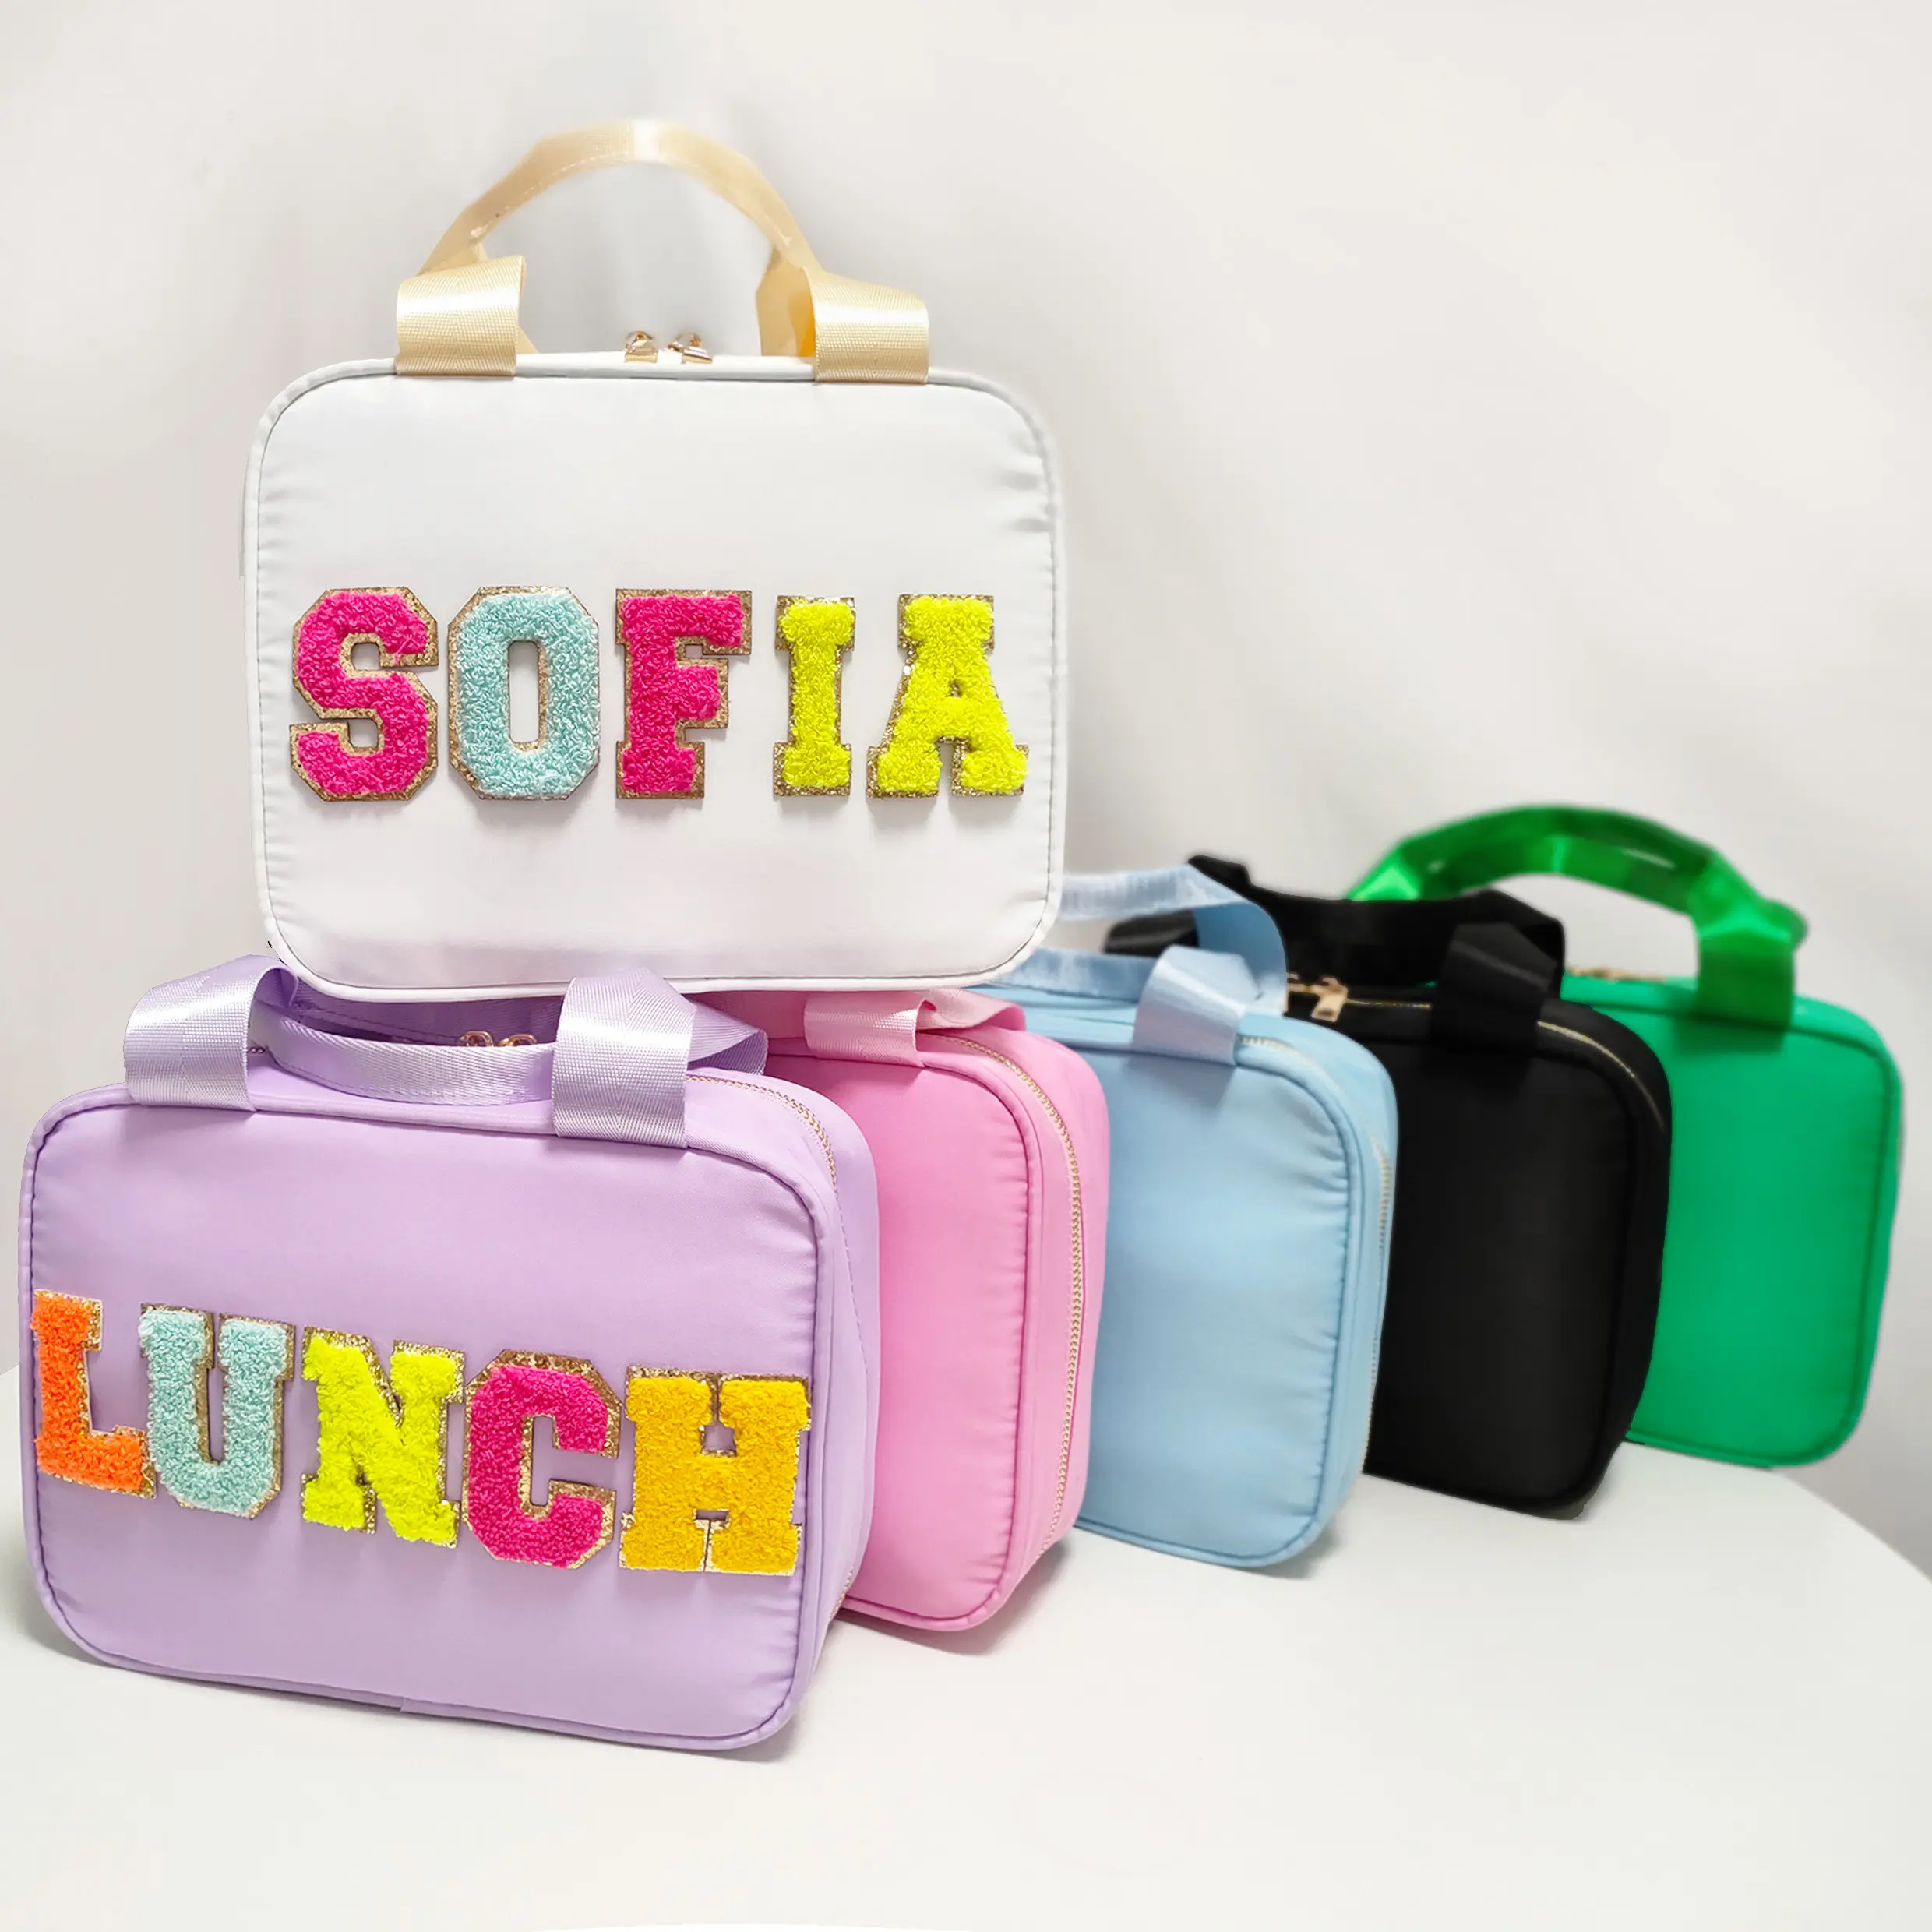 RTS High quality Large Capacity Food storage Bag with Embroidery Patch Name Pink Nylon Cooler Bag Waterproof Kids Lunch Bag box